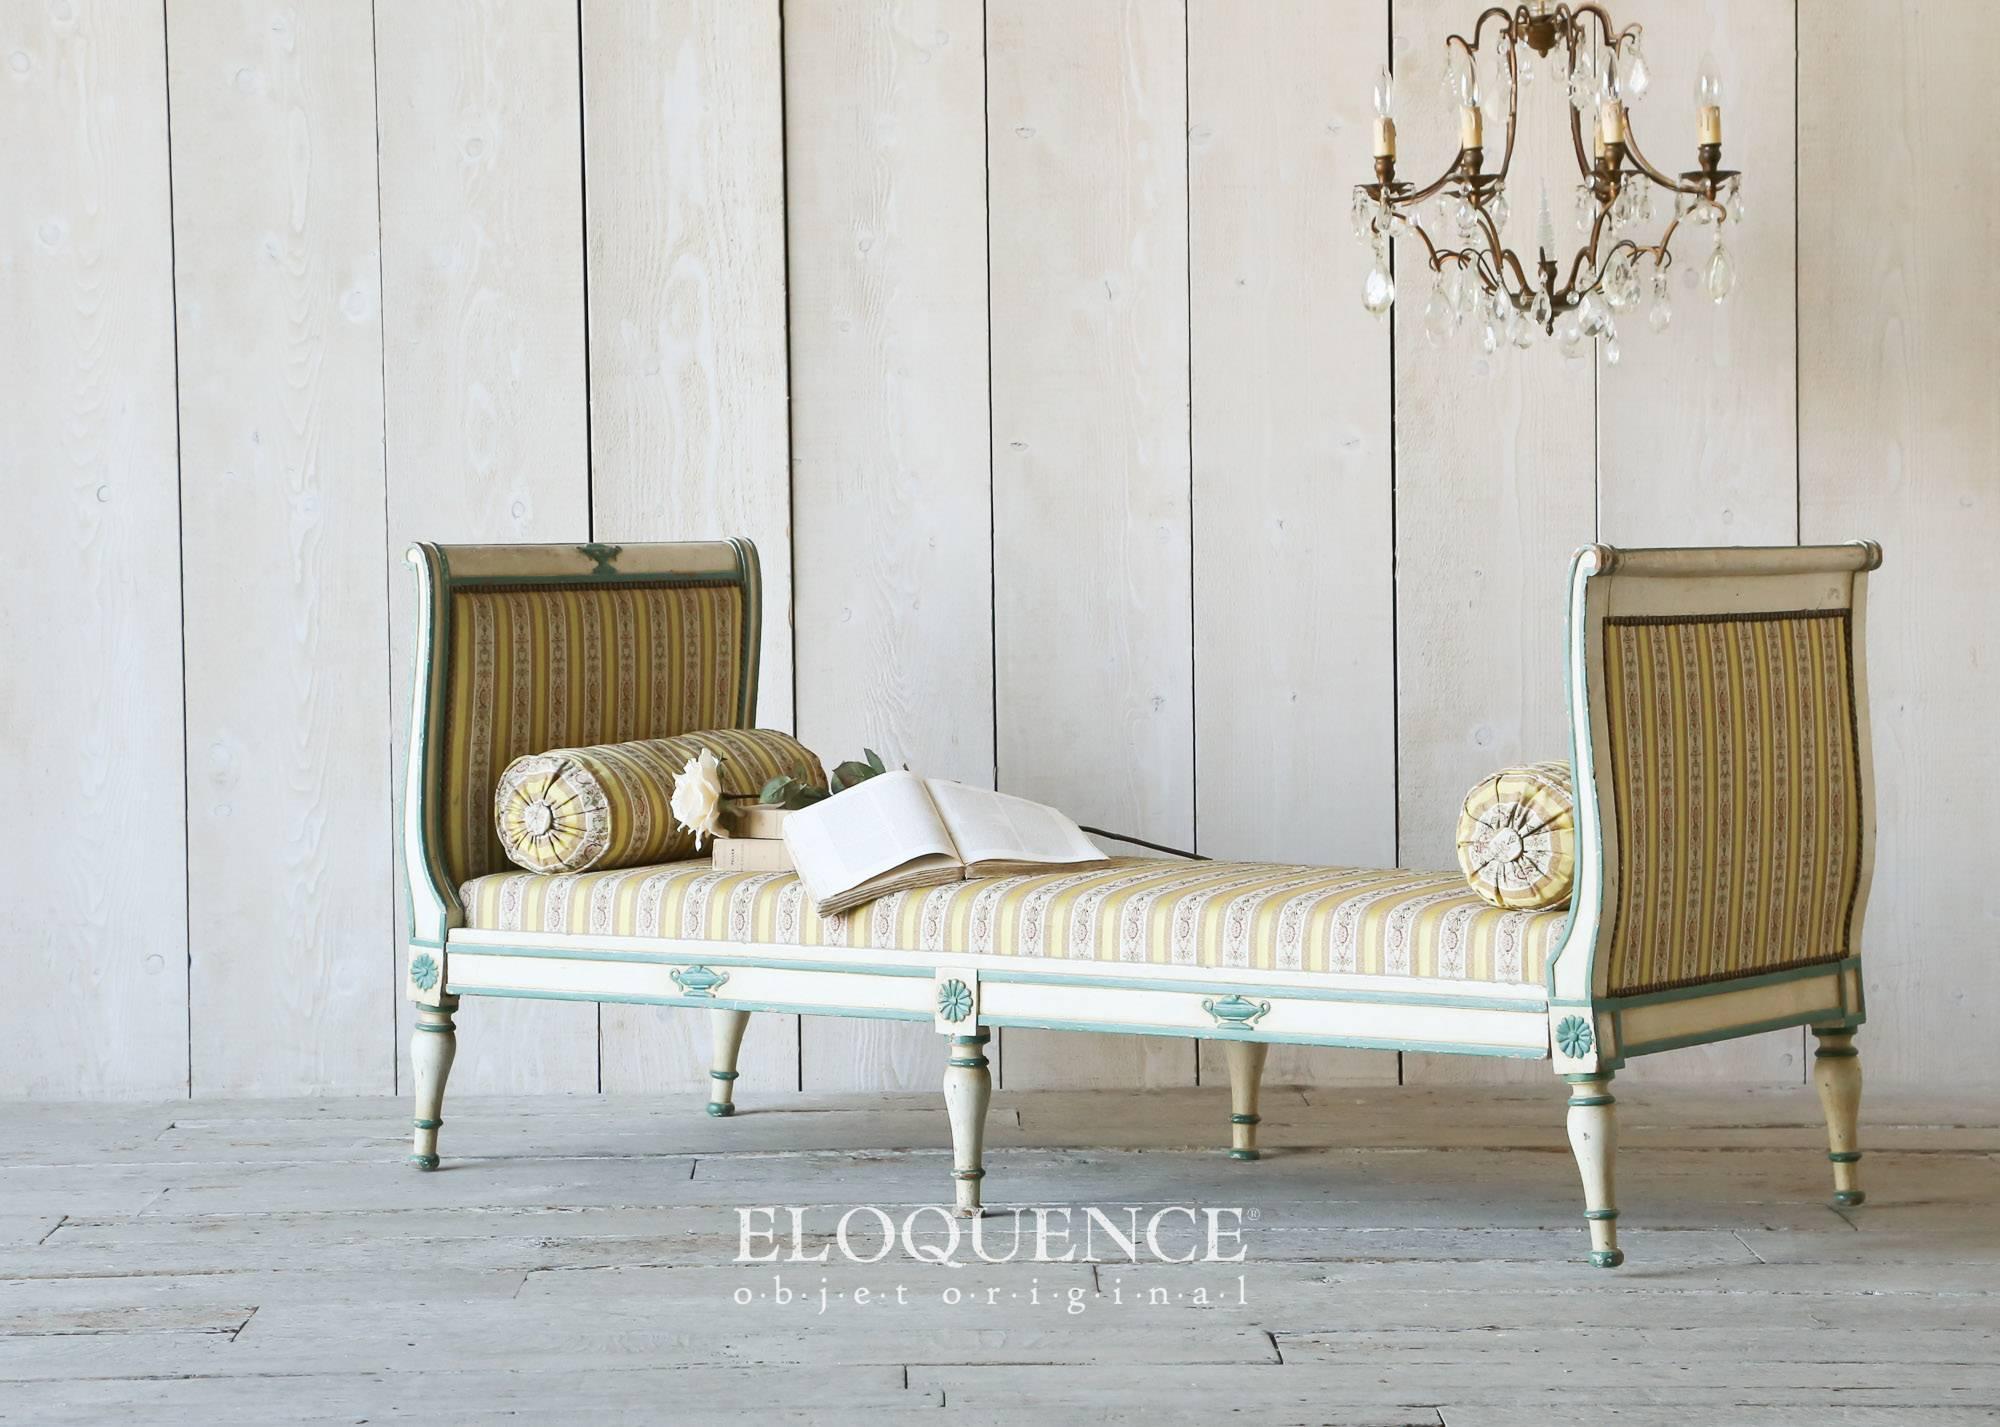 Lovely antique Empire style daybed finished in pale cream with vibrant teal highlights. Upholstered in striped satin damask in shades of gold, yellow, olive, pale pink, and rose. This is a petite bed with plenty of charm!